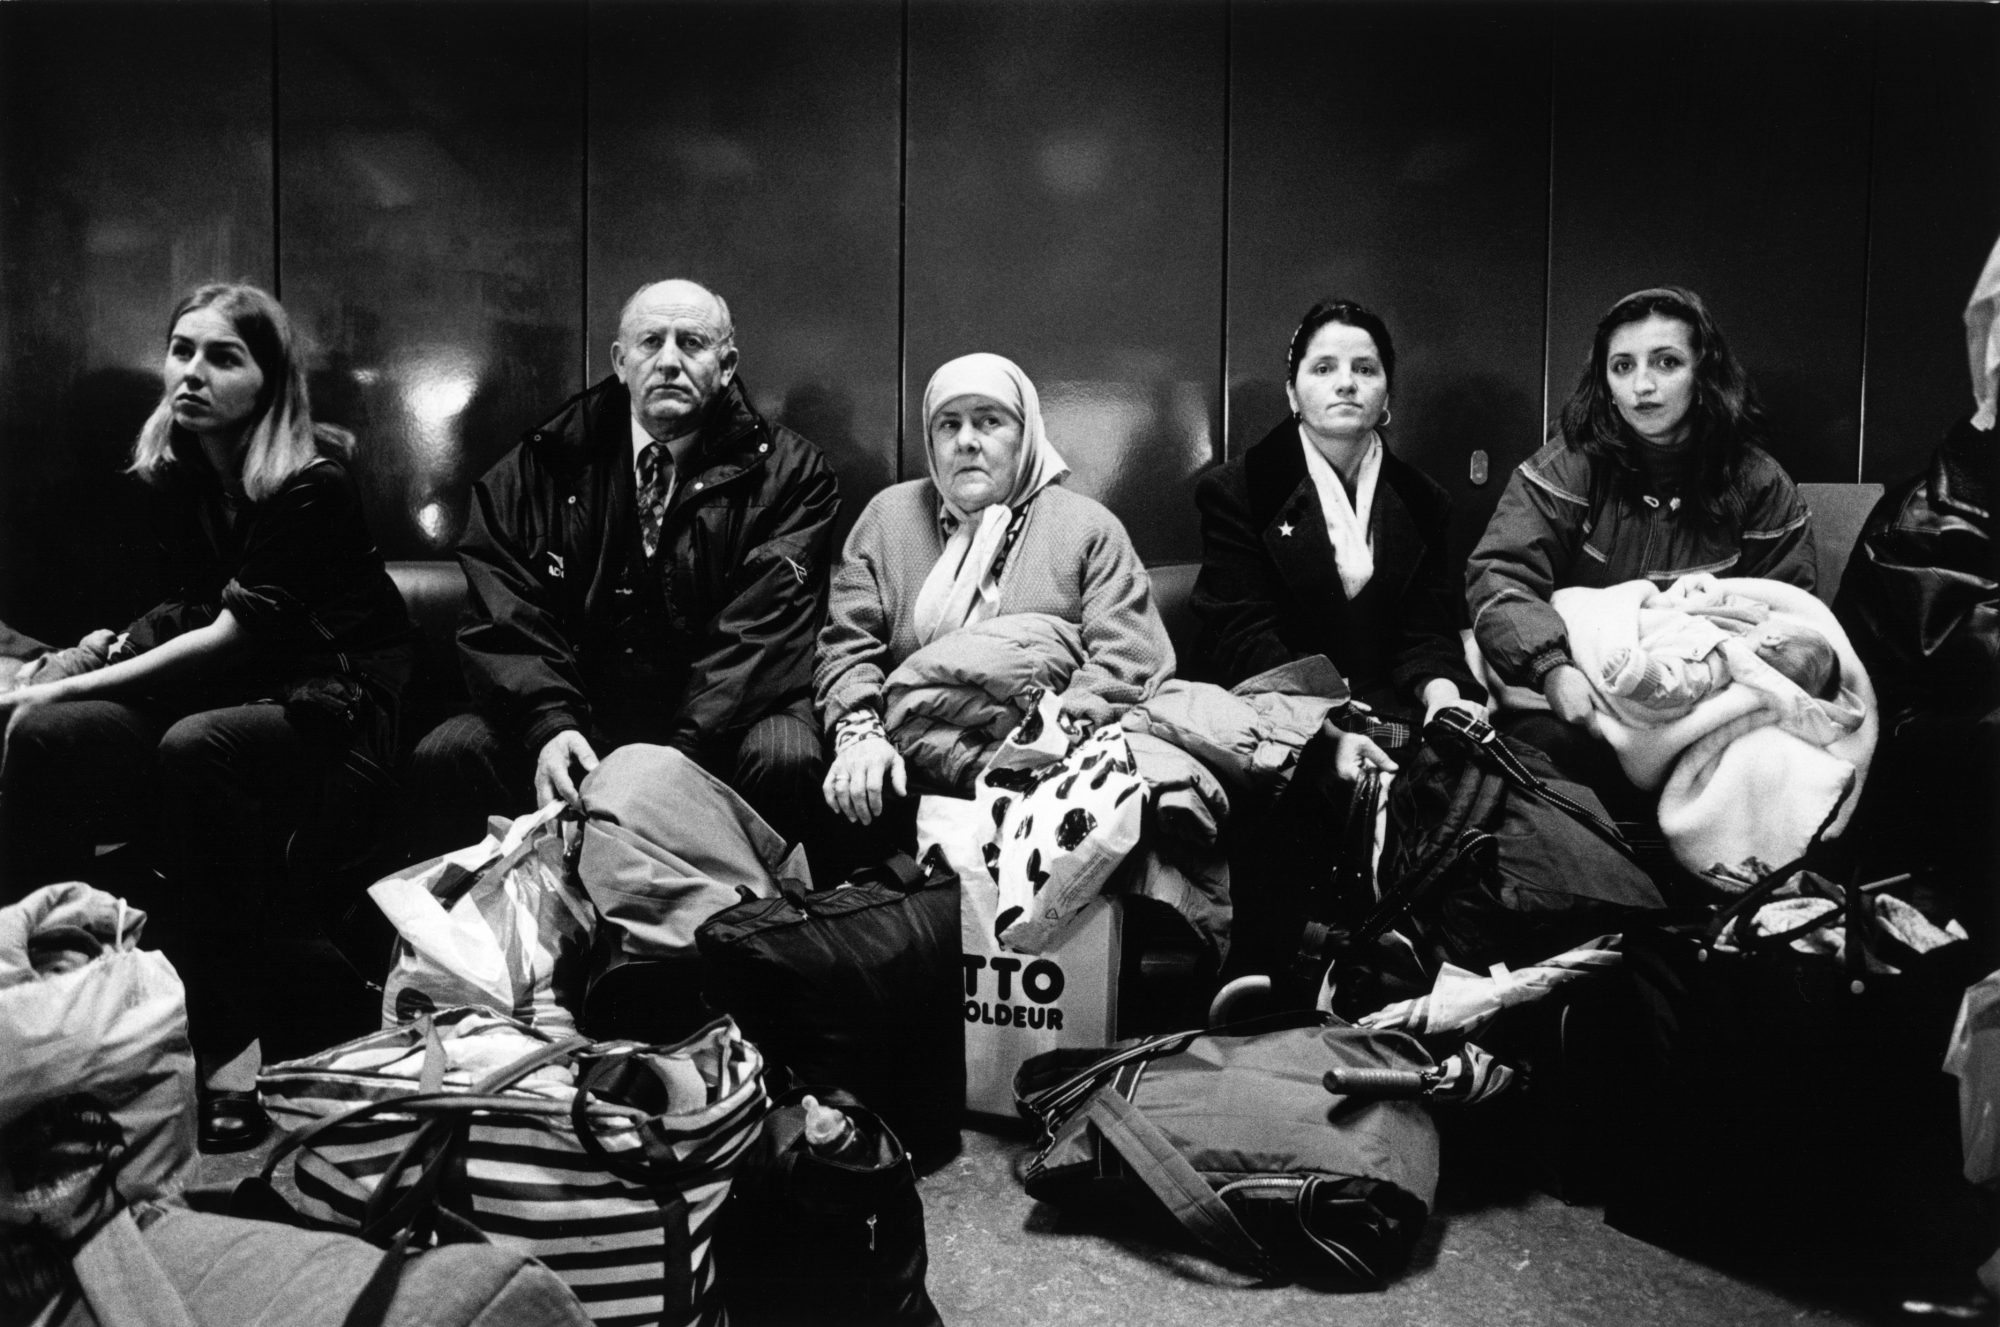 Zurich Airport, Switzerland 10/1999
©2000 Meinrad Schade / Lookat
www.lookat.ch

Borders
War refugees from Kosovo-Albania waiting for their flight to Skopje. They are returning voluntarily although their permit to remain in Switzerland does not expire for another seven months and they will face a bitingly cold winter on their return to Kososva